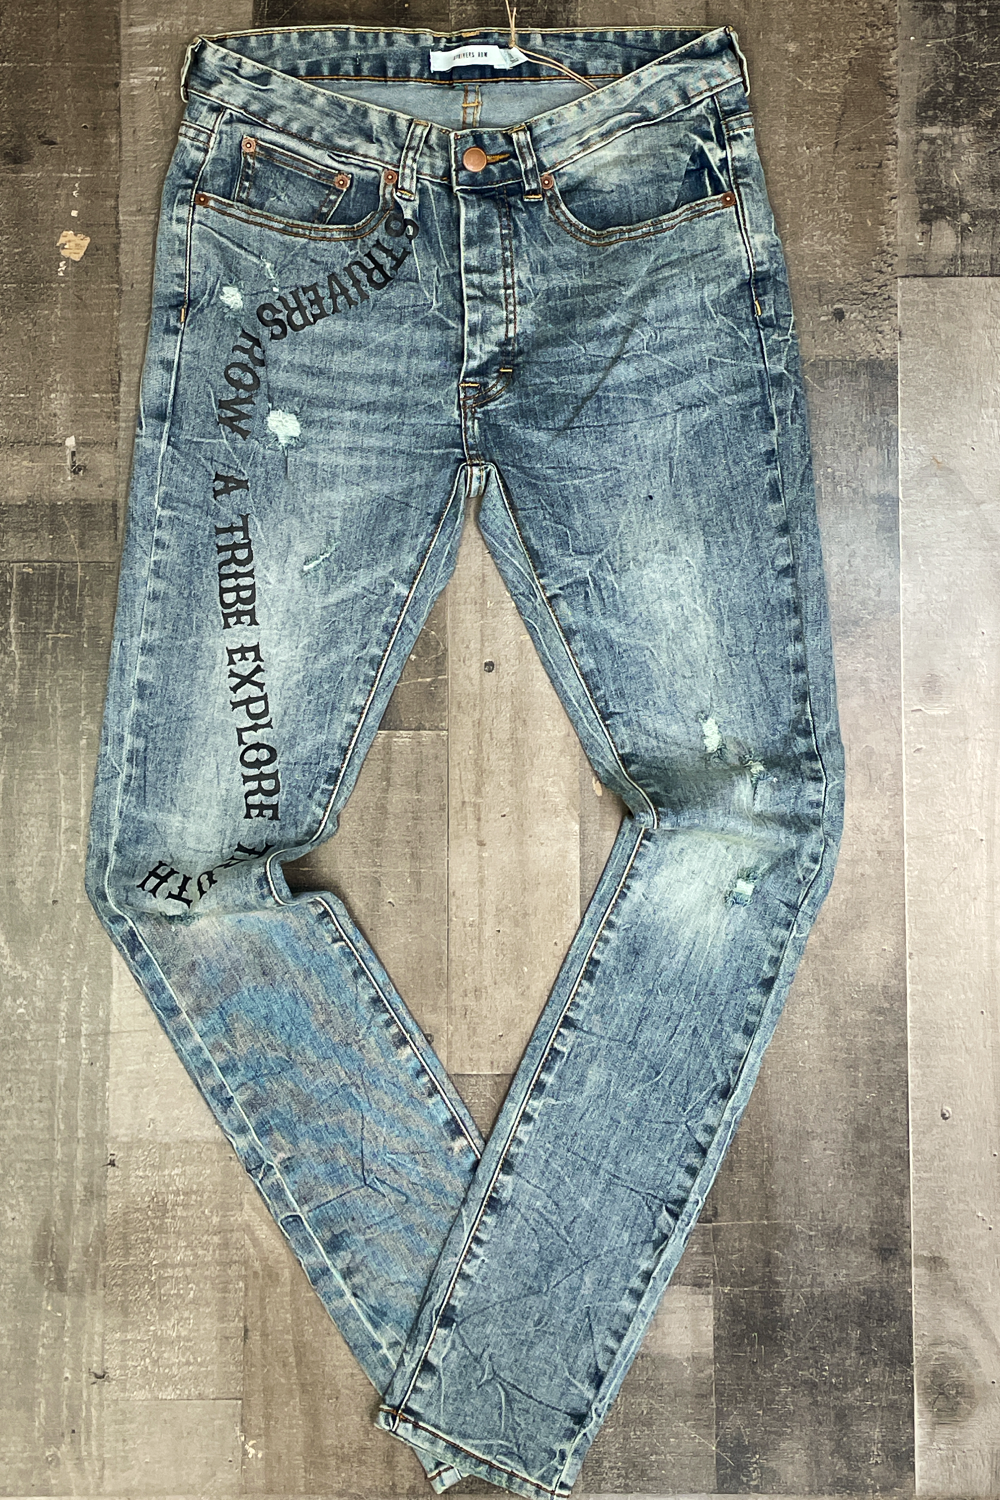 Strivers Row- sugar maple res jeans